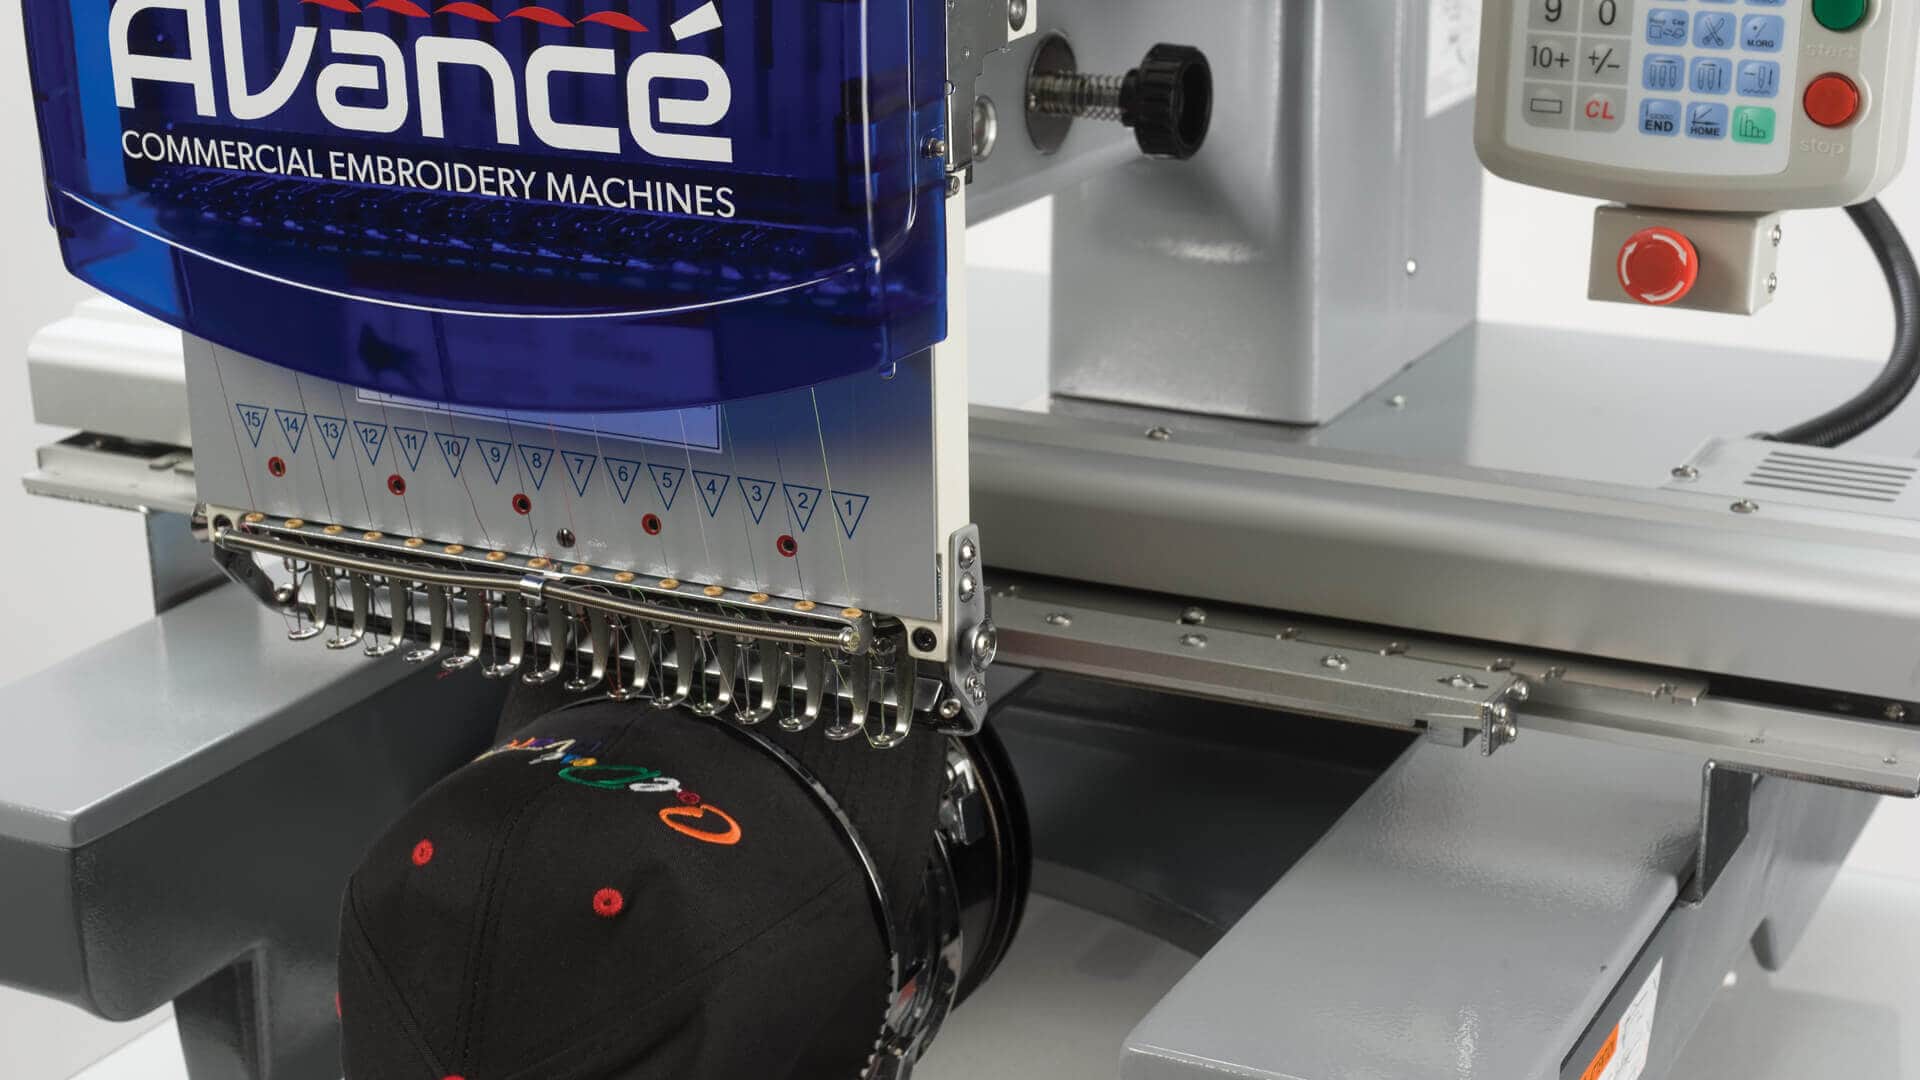 Cap Embroidery is Easy with Avance 1501C Commercial Embroidery Machine